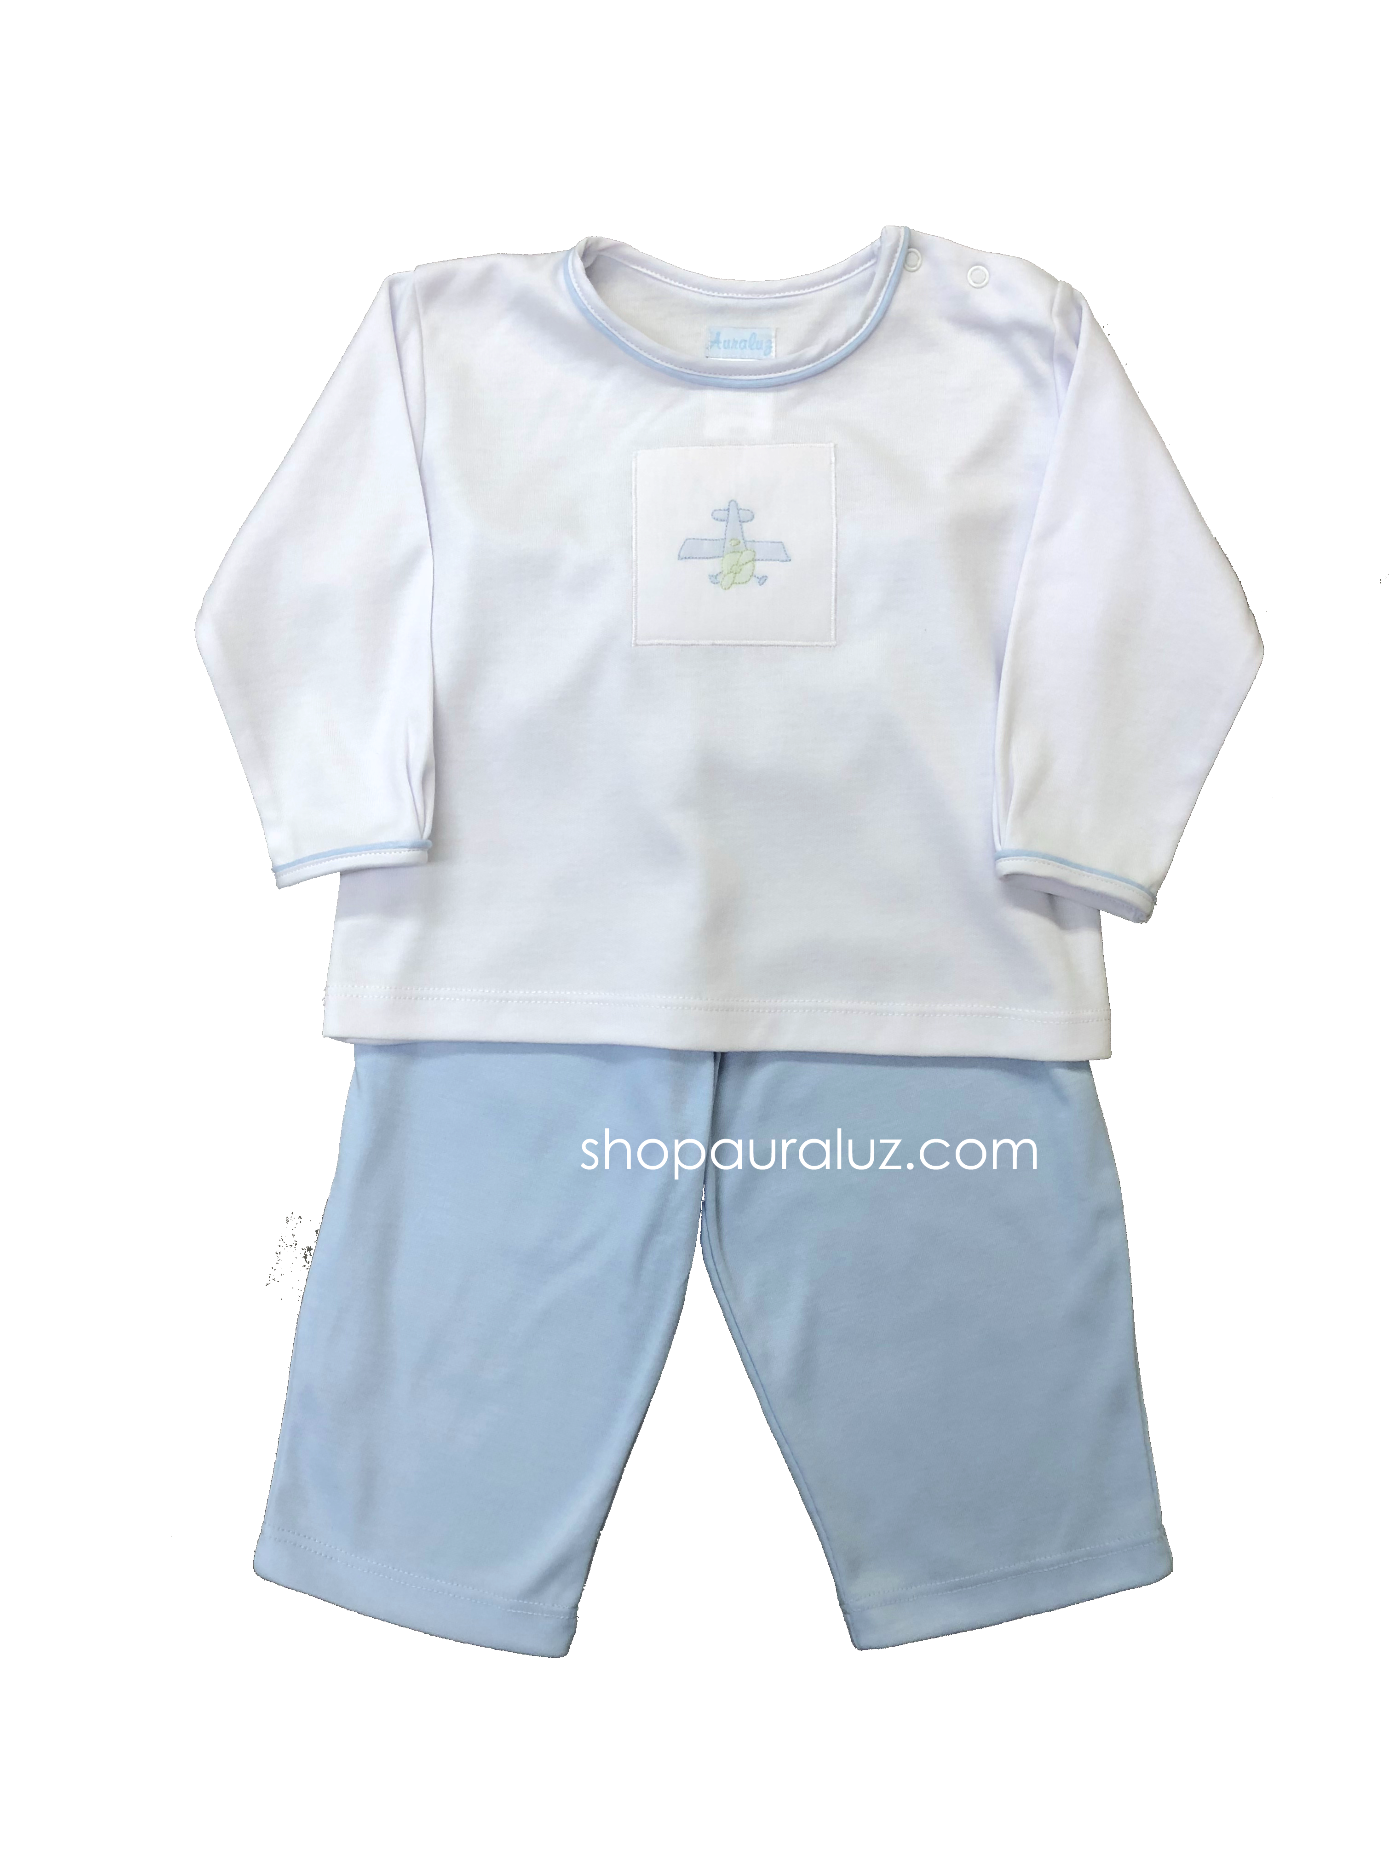 Auraluz Knit Boy 2pc...Blue/white with embroidered airplane